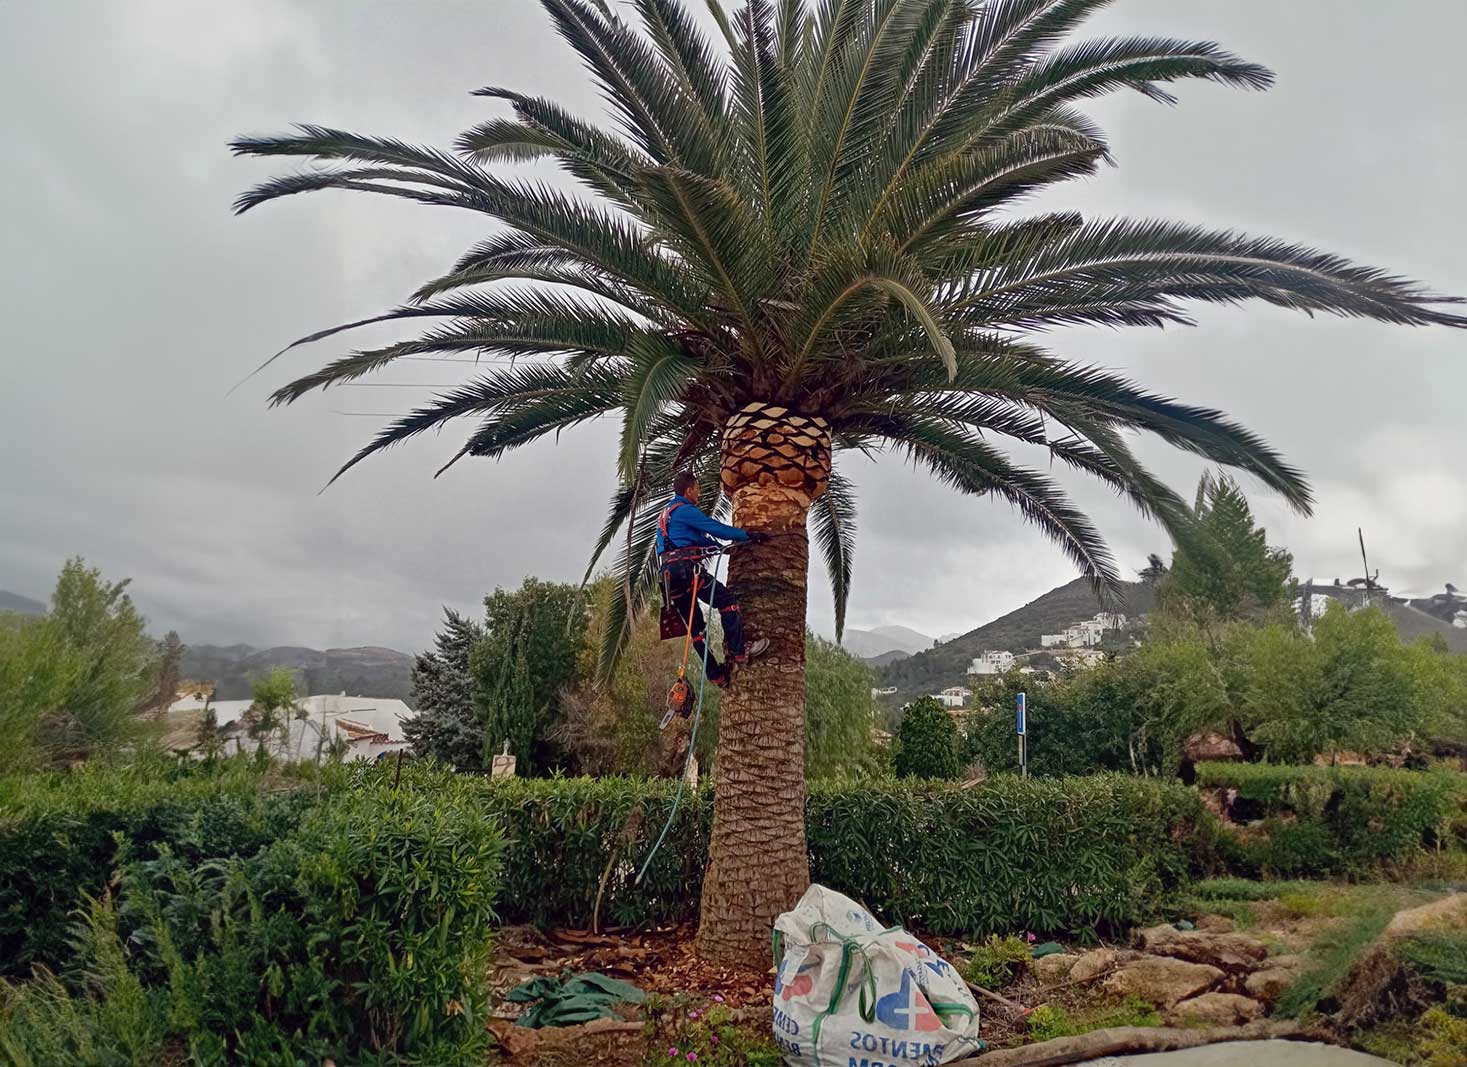 A palm tree being trimmed in San Diego with a DIY approach